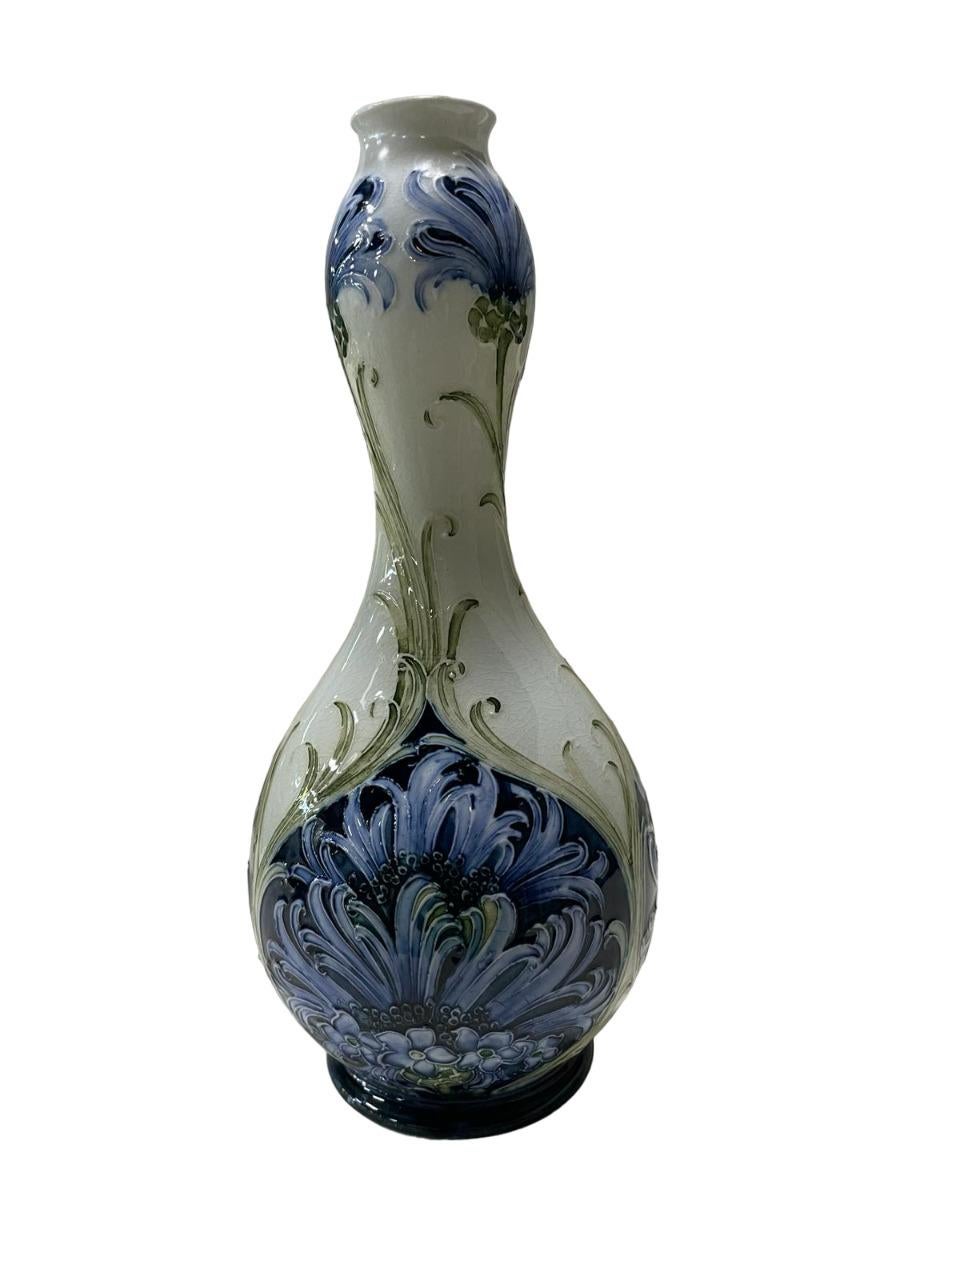 Moorcroft for James MacIntyre & Co., Florian Ware 'Cornflower' vase of double gourd form, decorated in blue and green on ivory ground, printed factory mark in brown, script signature in green.
Minor restoration
height 8.7 in — 22 cm
Good